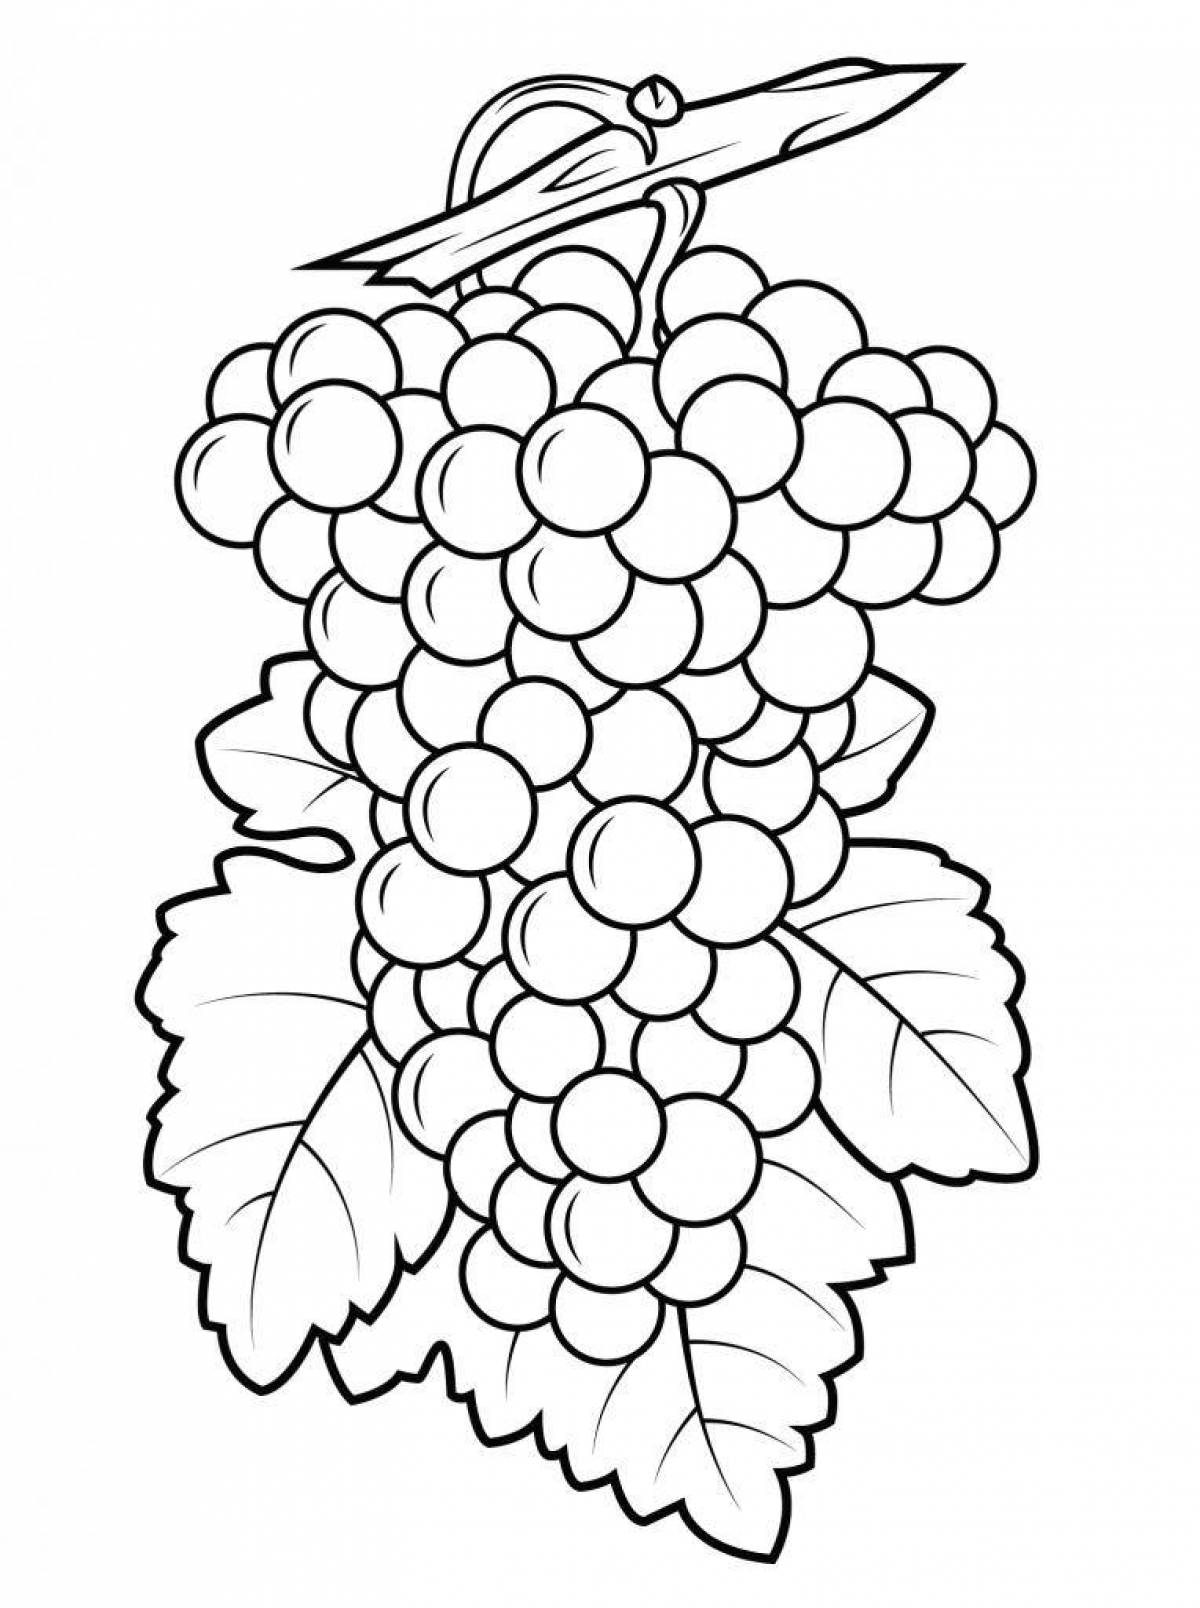 Coloring dazzling grapes for children